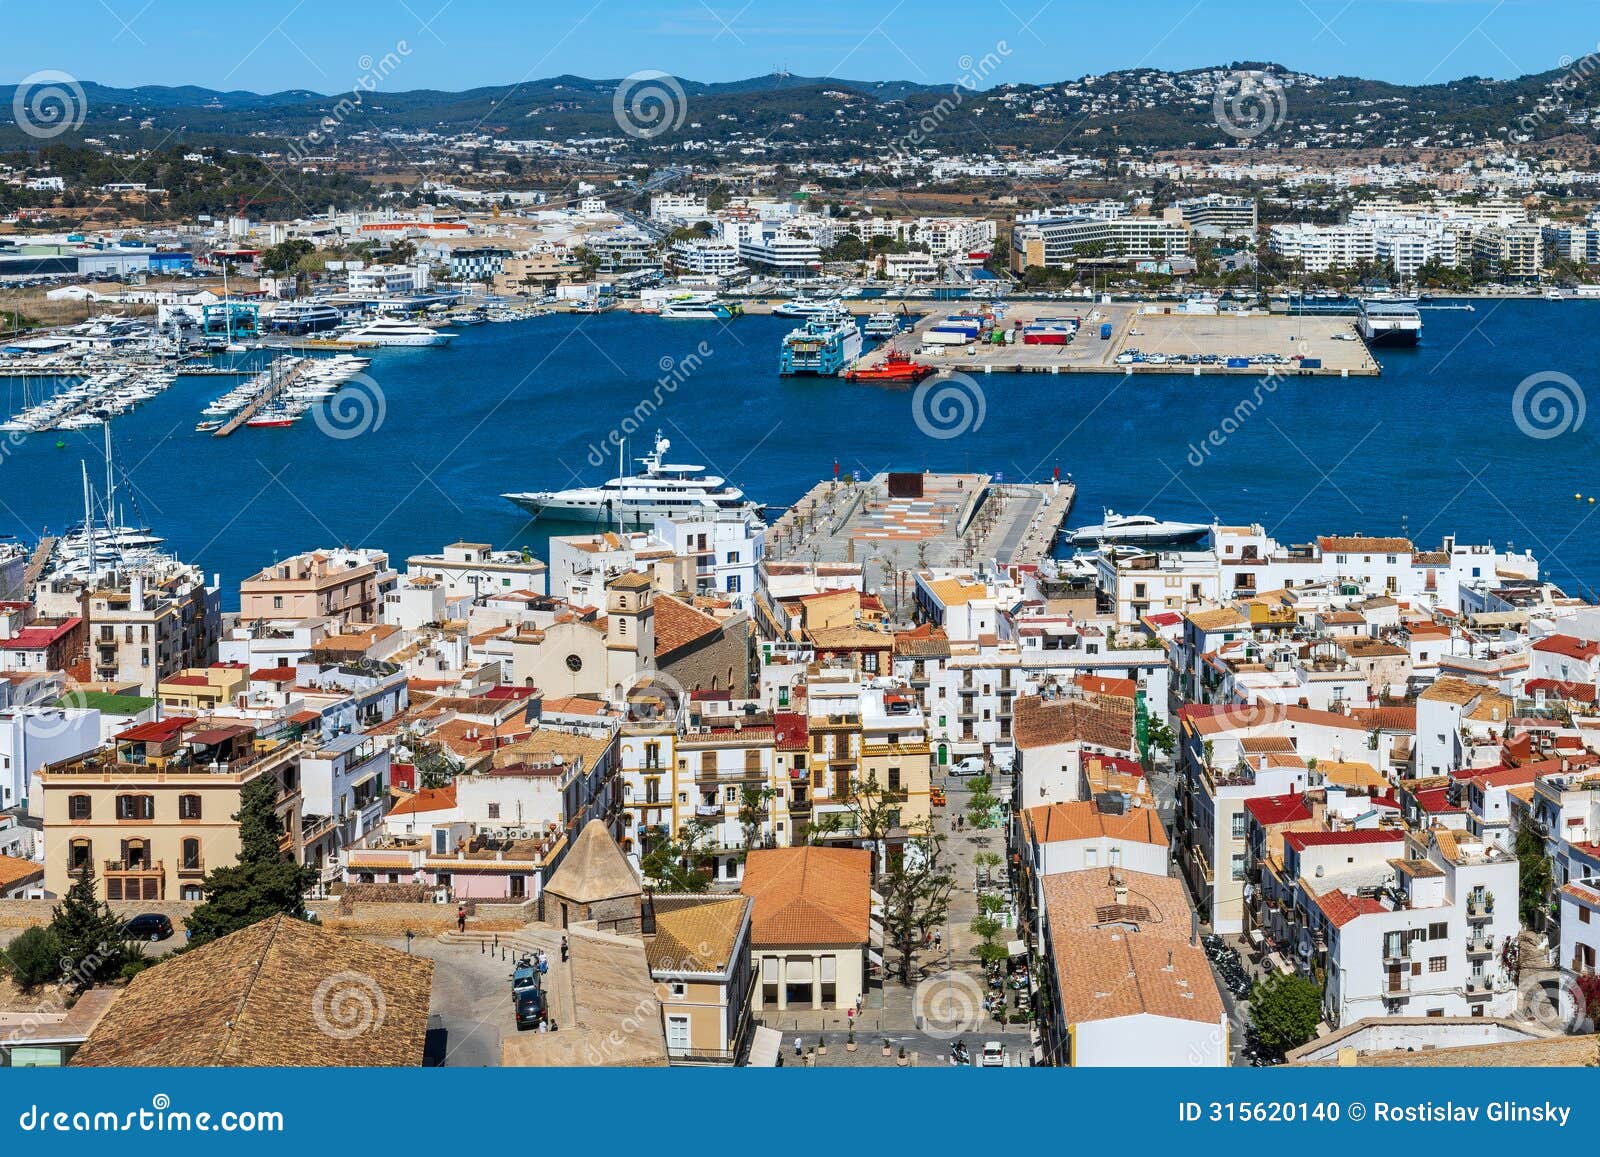 view from above of the houses and port of eivissa, ibiza, spain